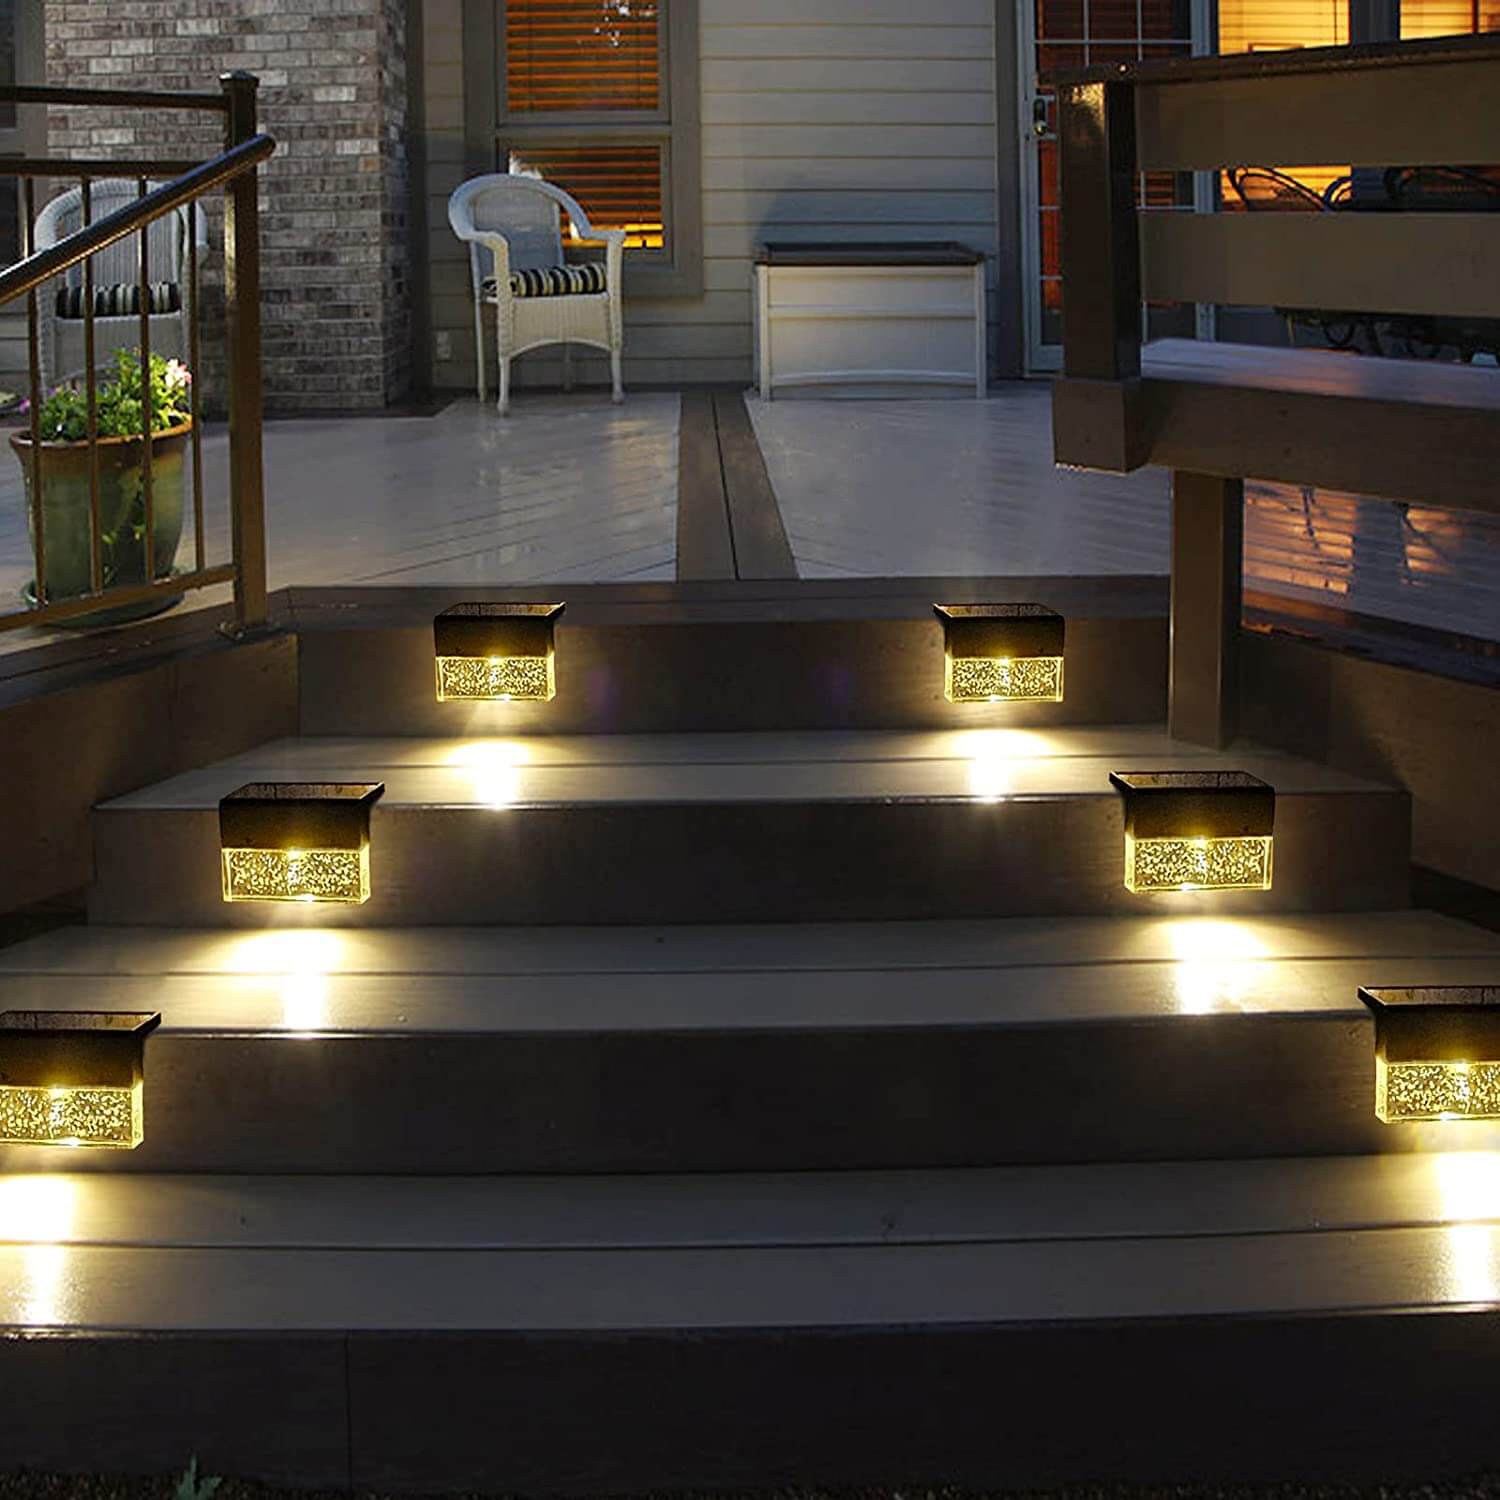 wowow waterproof color changing outdoor solar deck lights